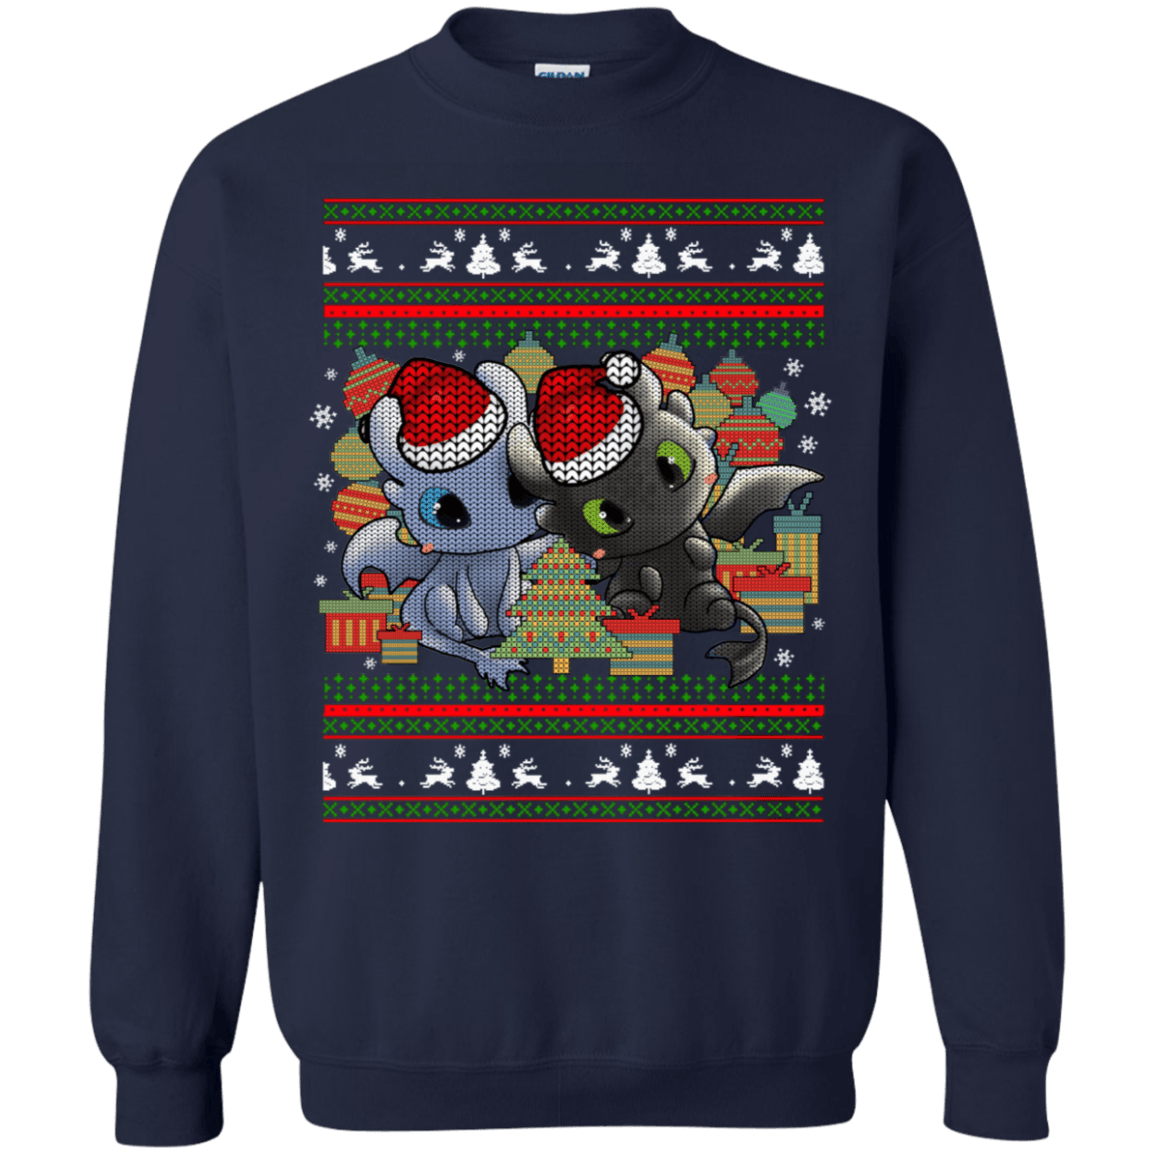 How To Train Your Dragon Christmas Sweater